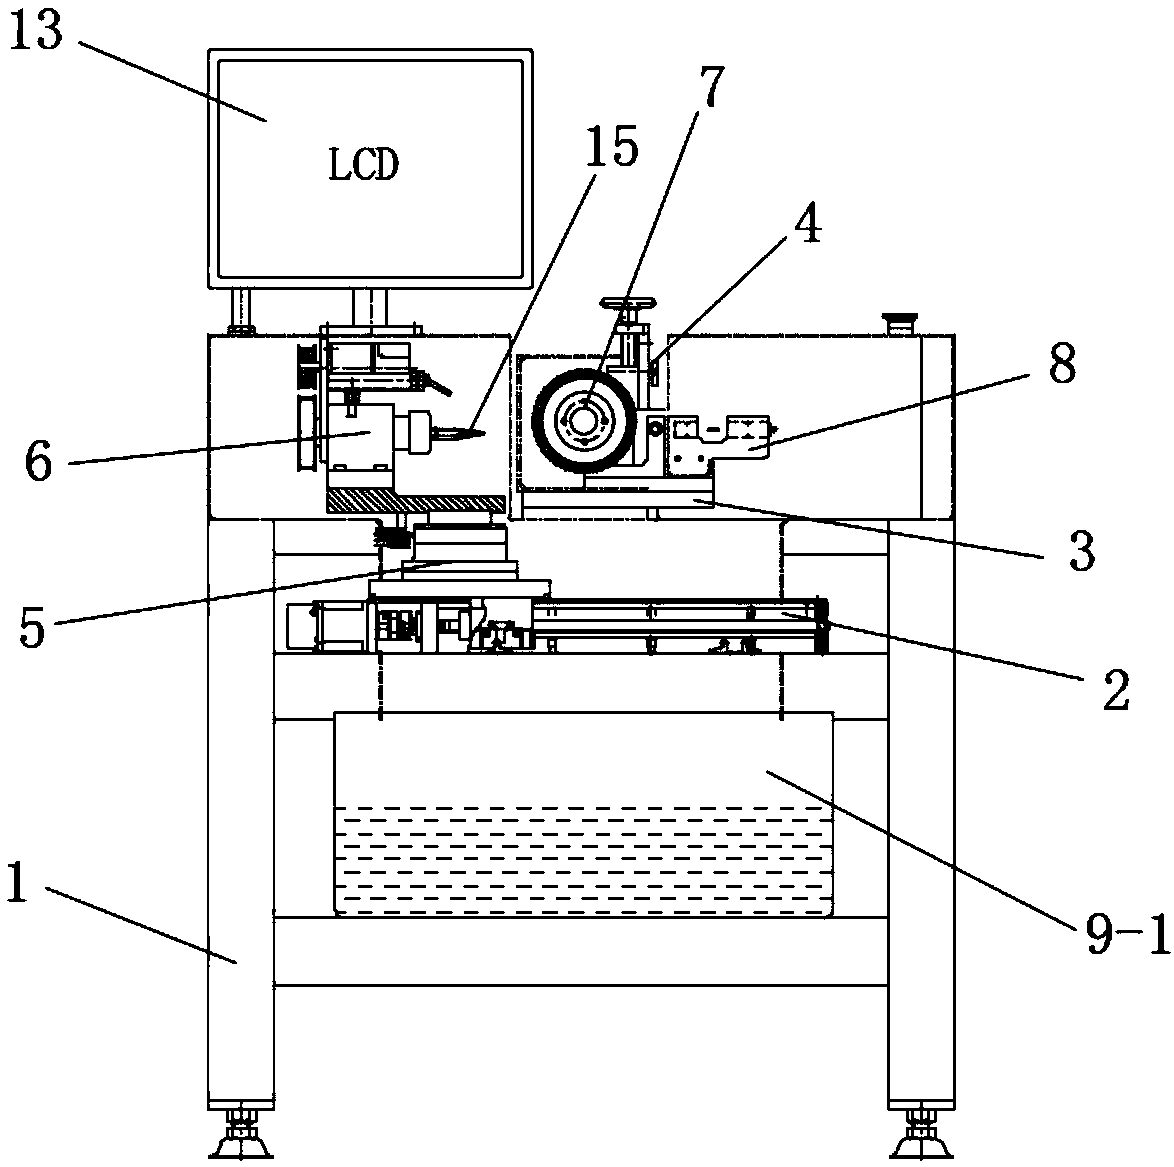 Five-axis ganged automatic numeric-control tool sharpener